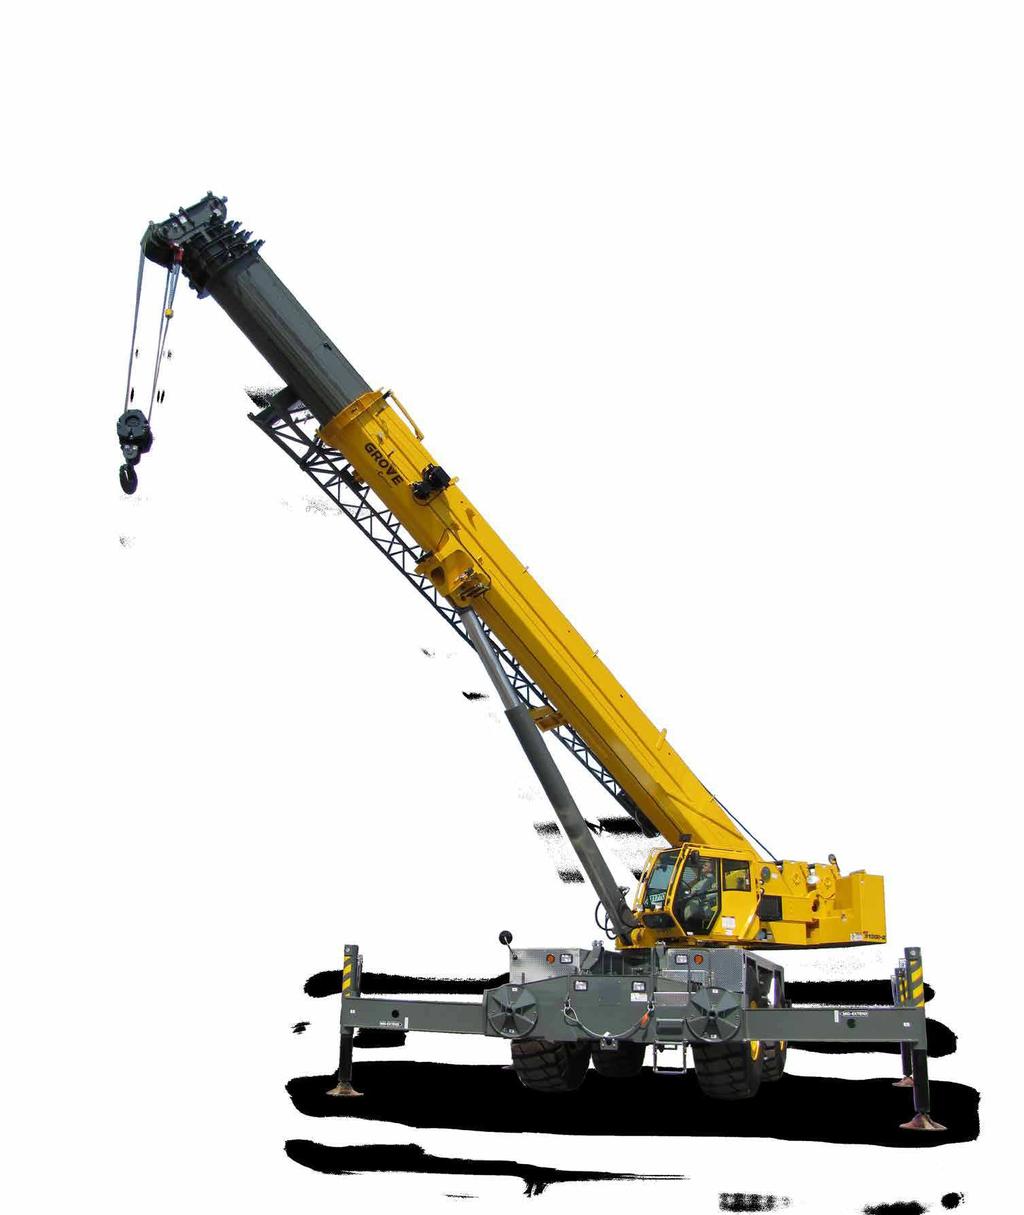 five-section, full power boom 11 m -18 m (36